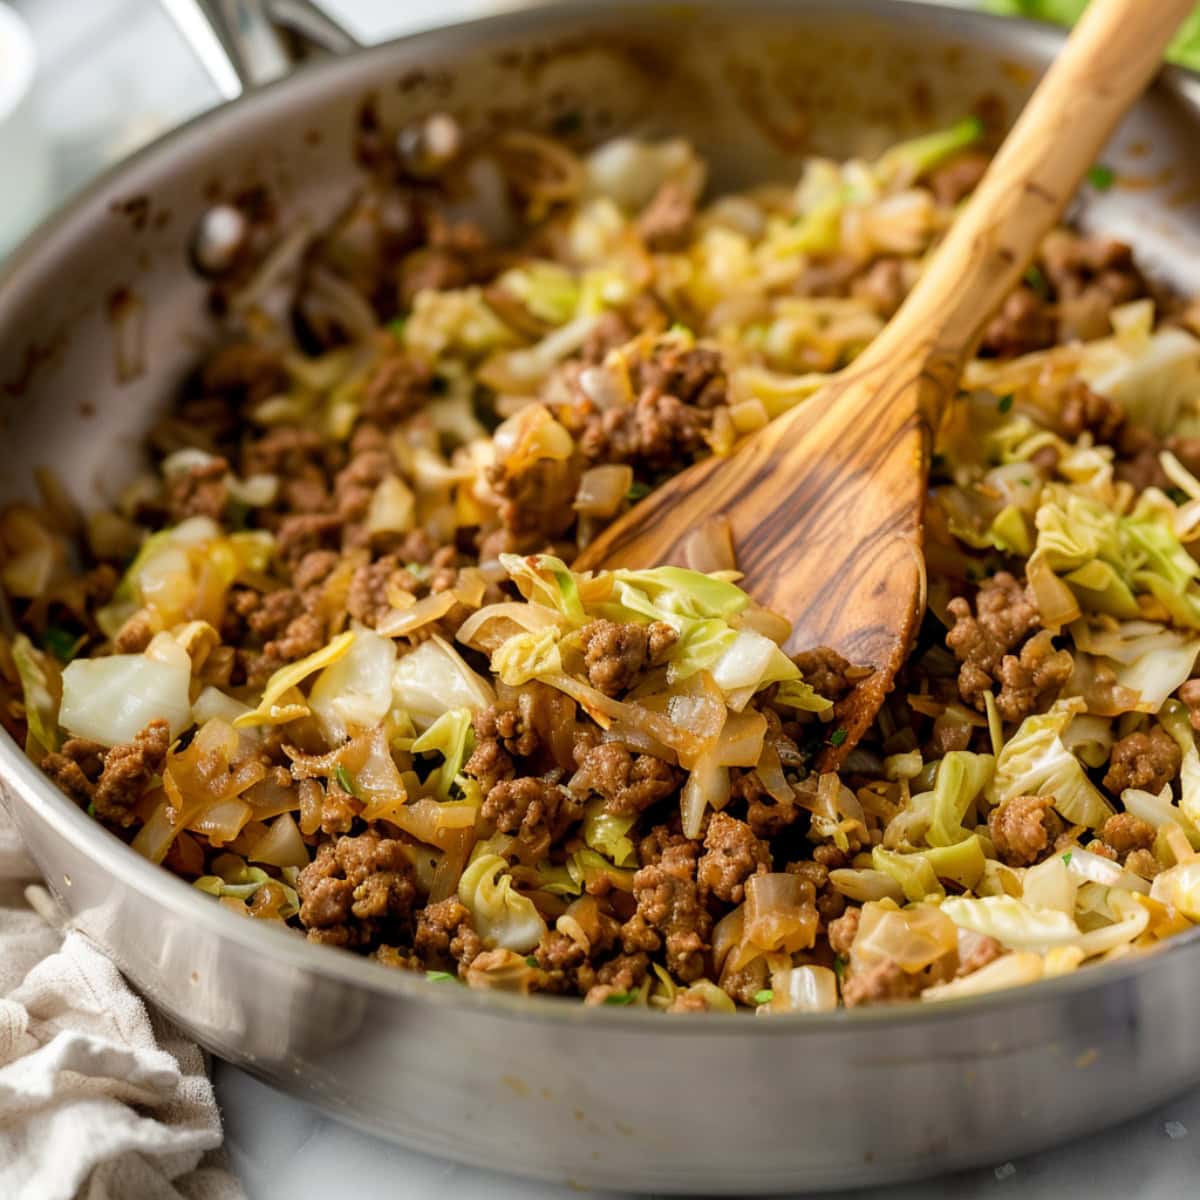 Ground pork and cabbage tossed in a stainless skillet with wooden ladle.